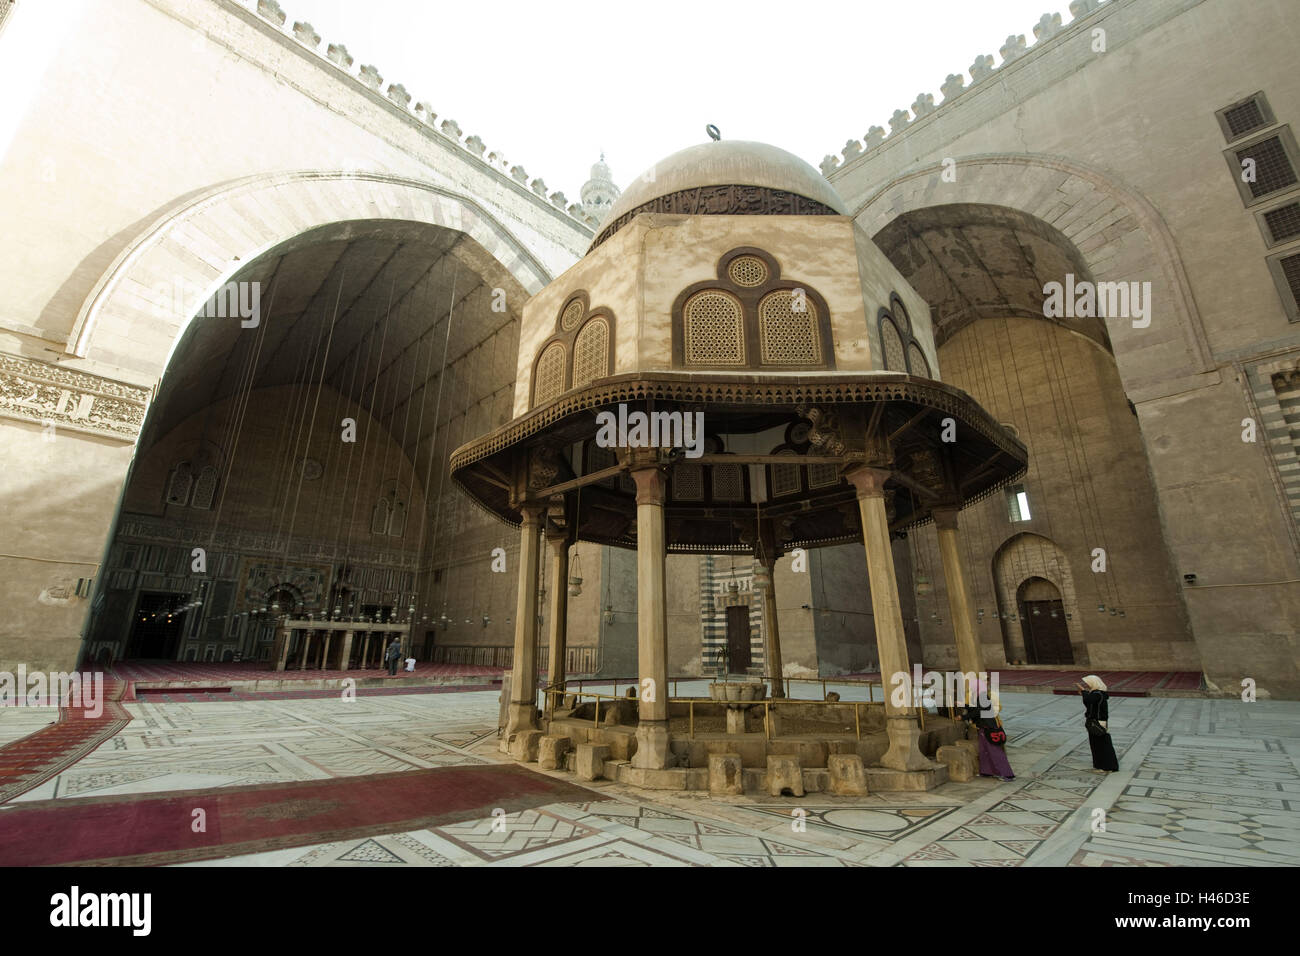 Egypt, Cairo, sultan Hassan Moschee, cleaning well in the court the mosque, Stock Photo